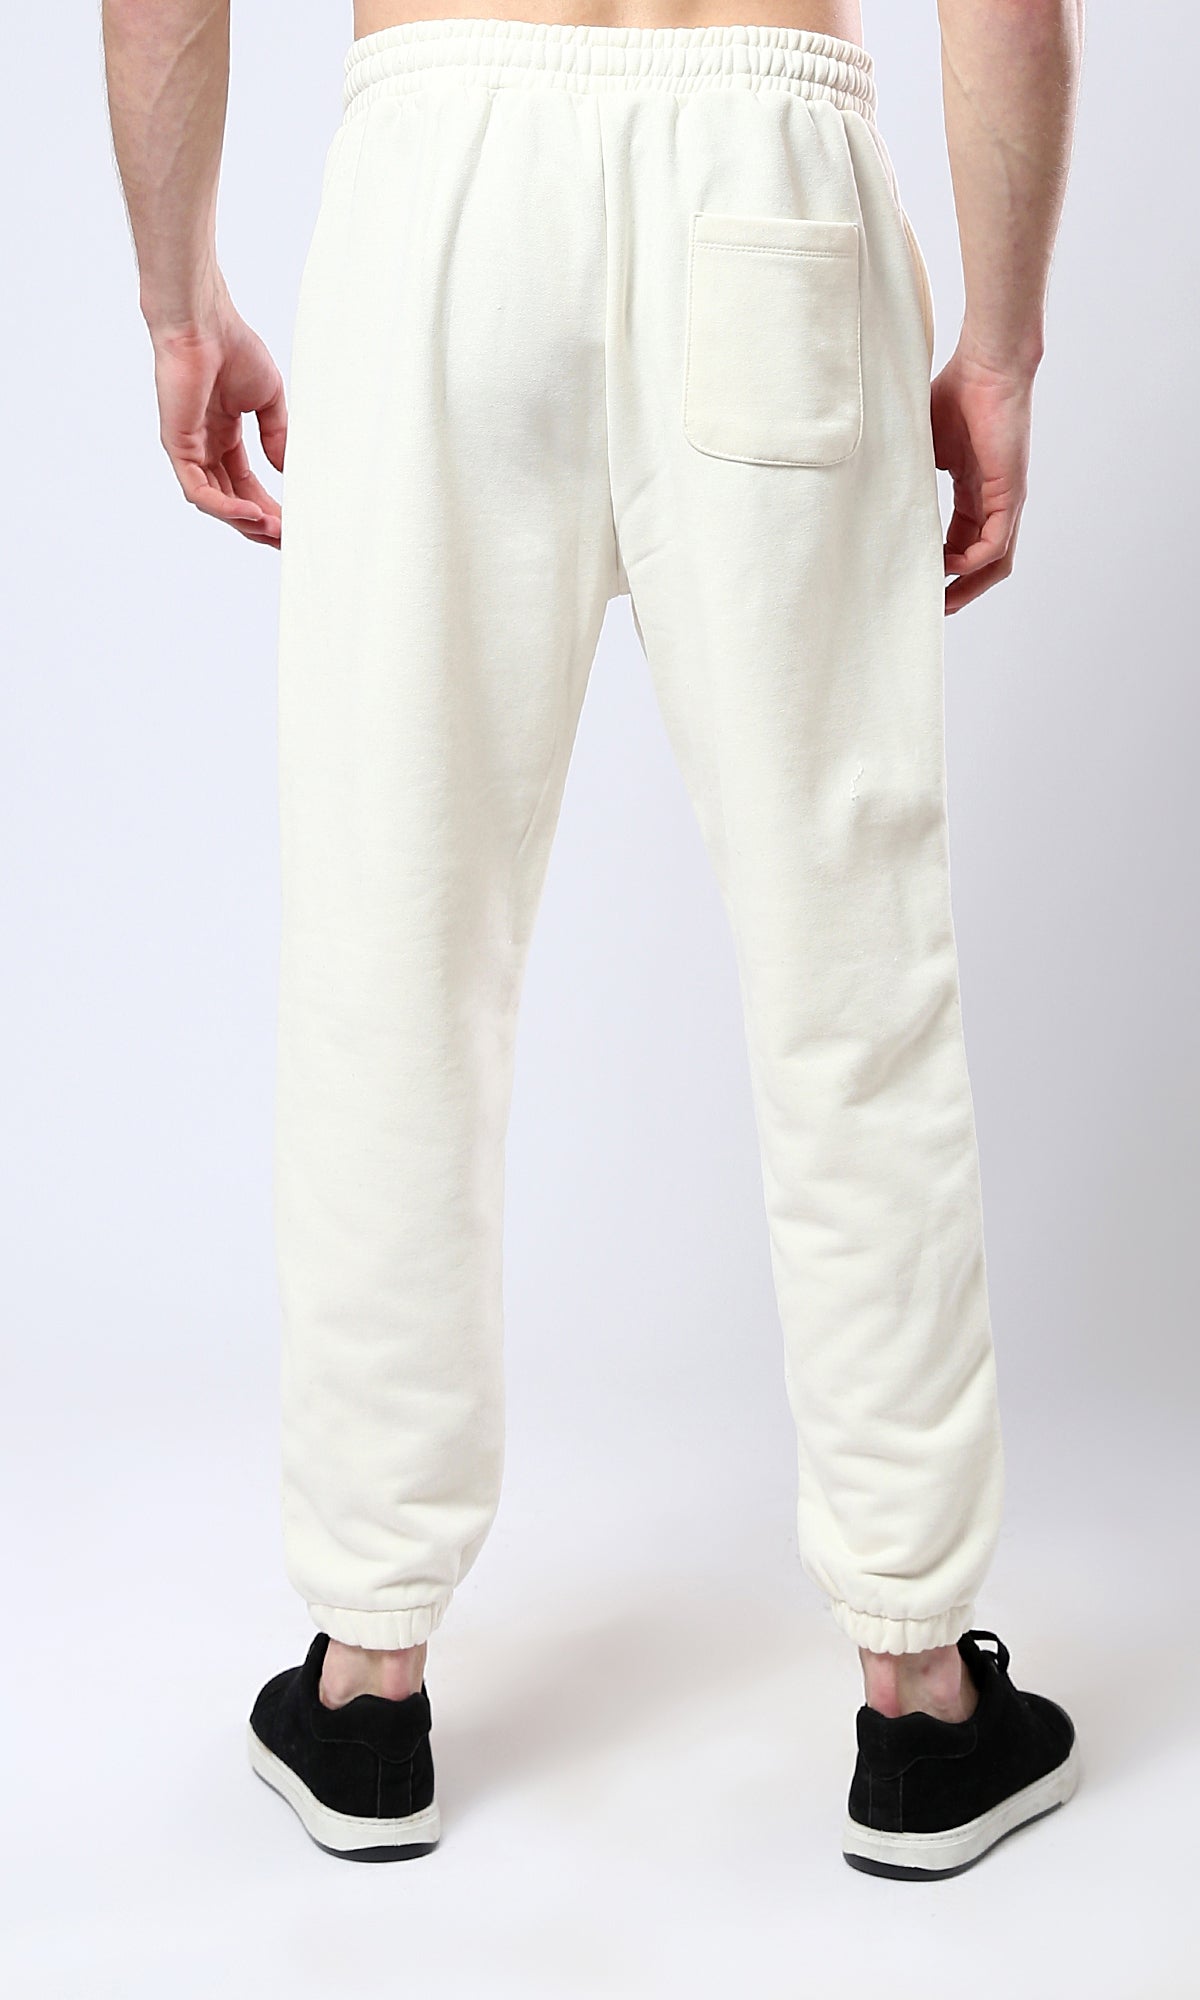 O178903 Slip On Beige Casual Jogger Pants 